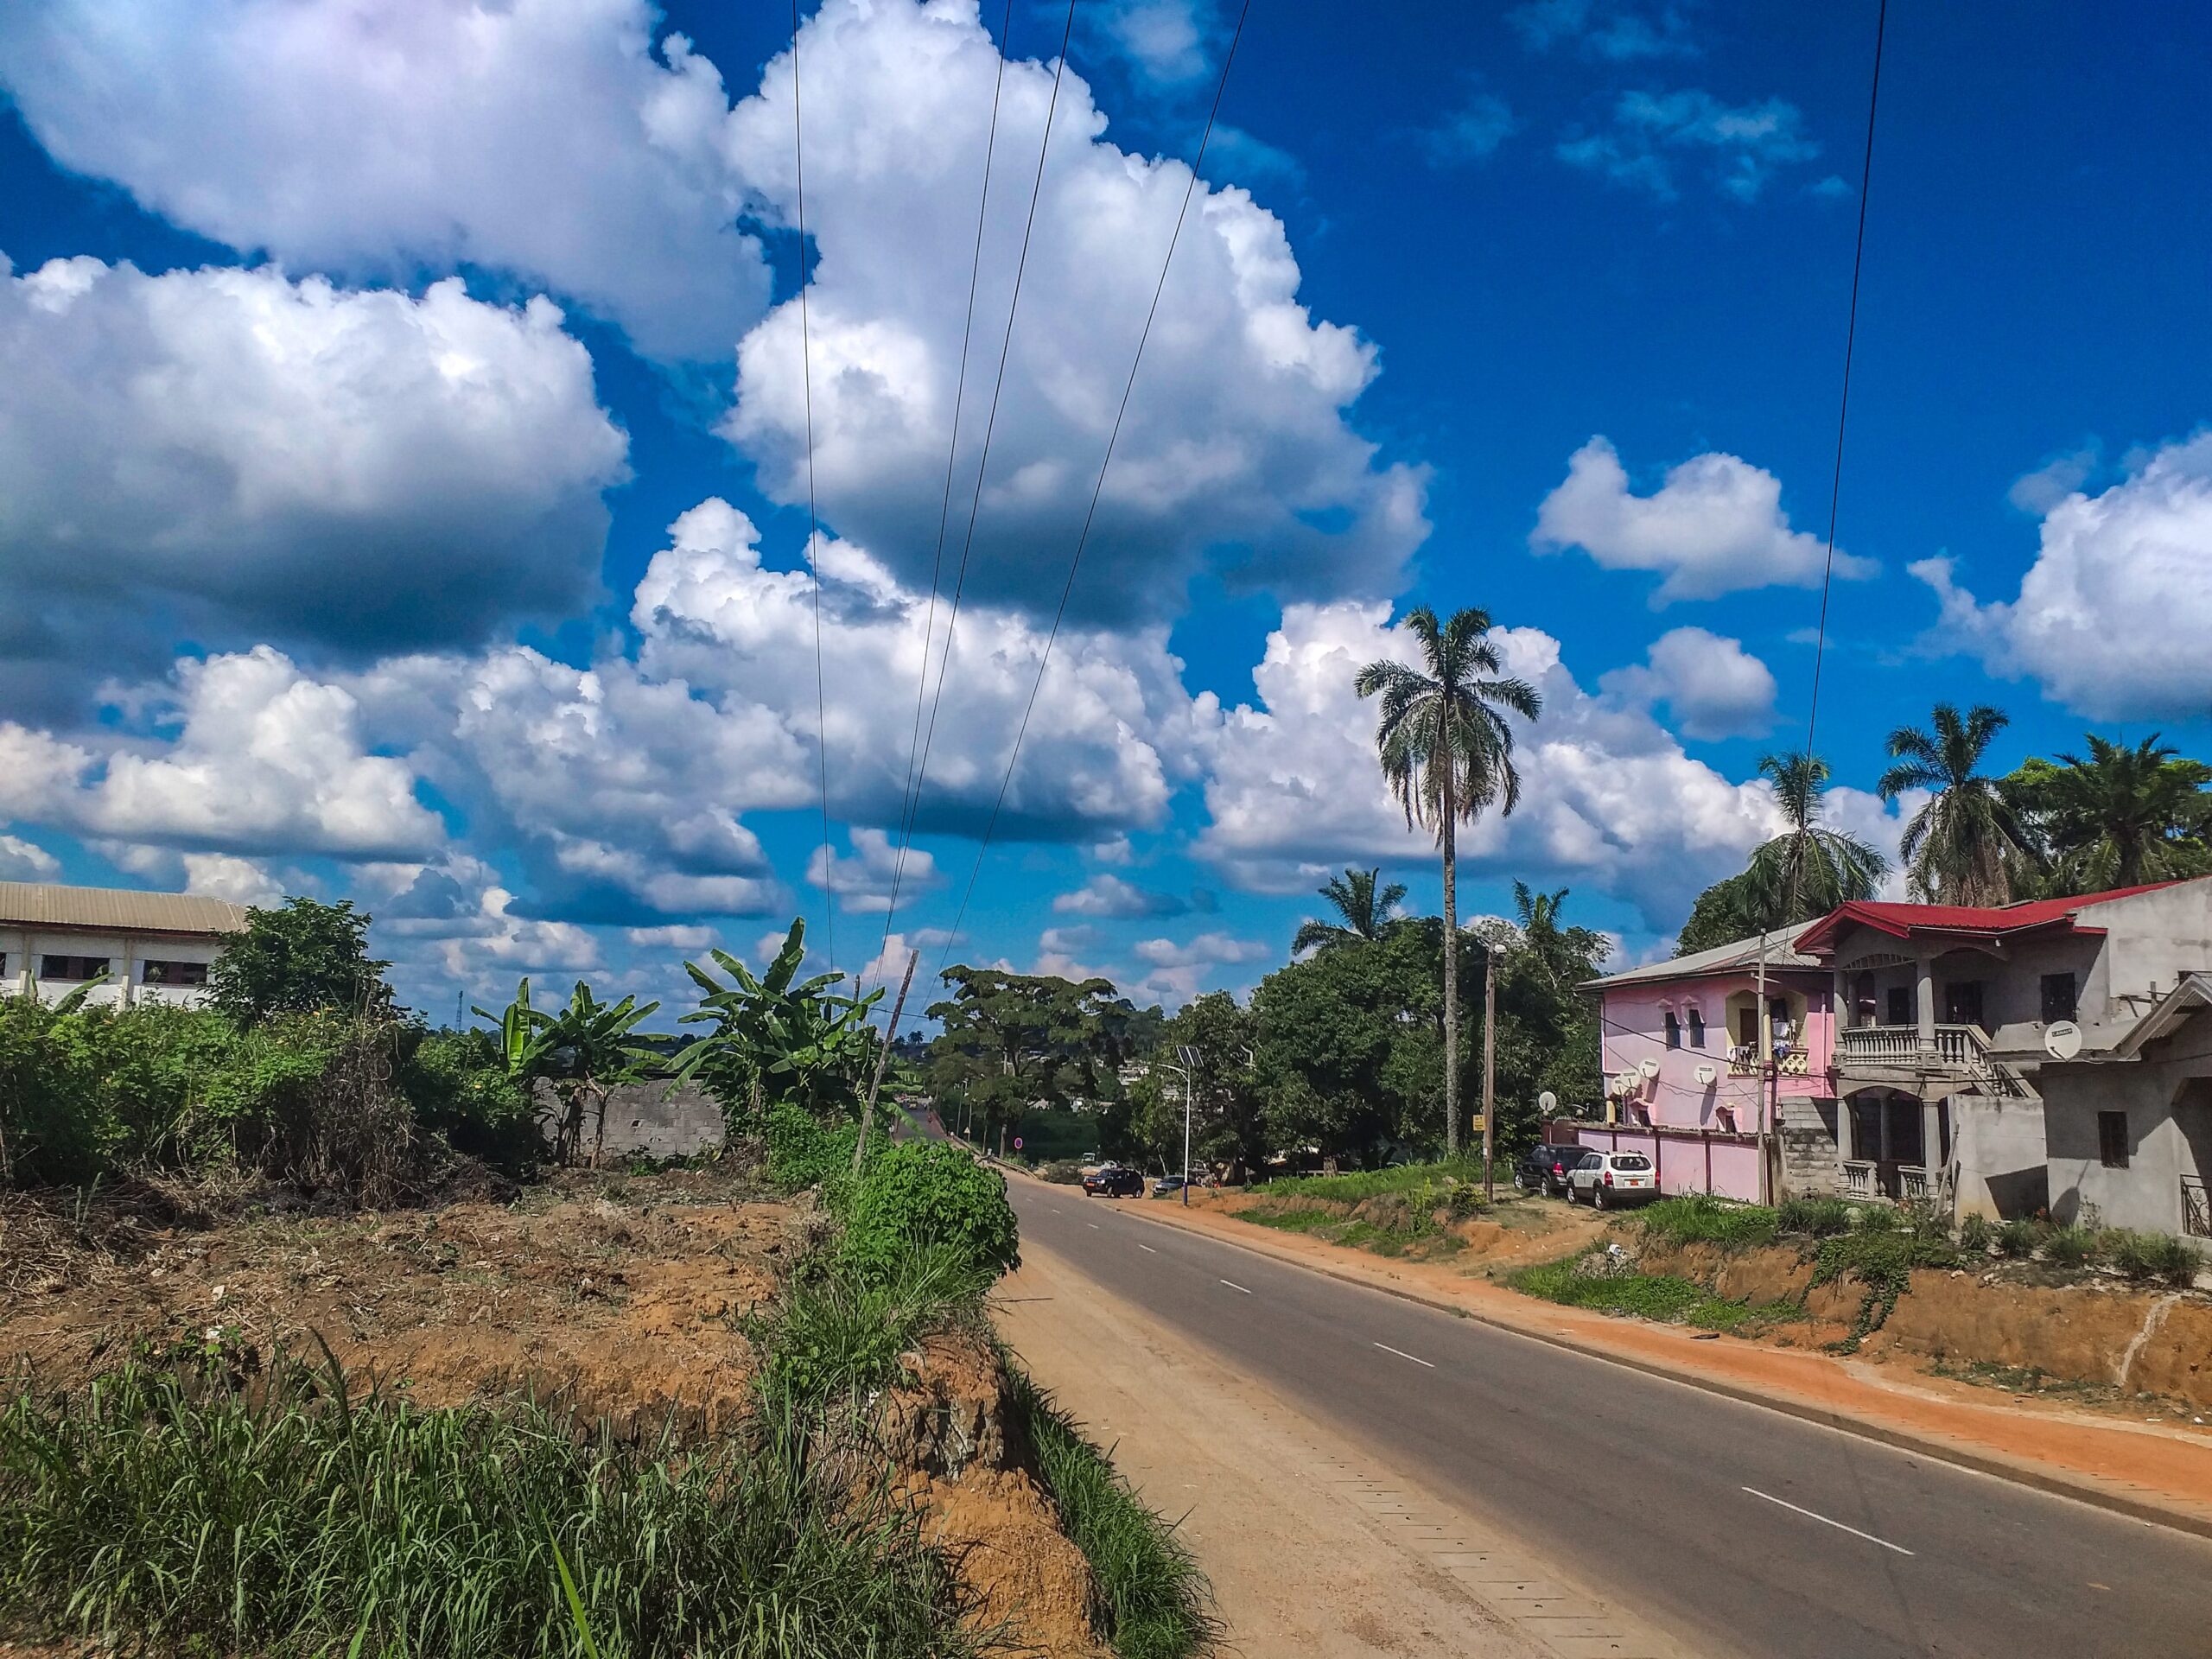 Street of the oyack 1 district in the city of mbalmayo in Cameroon